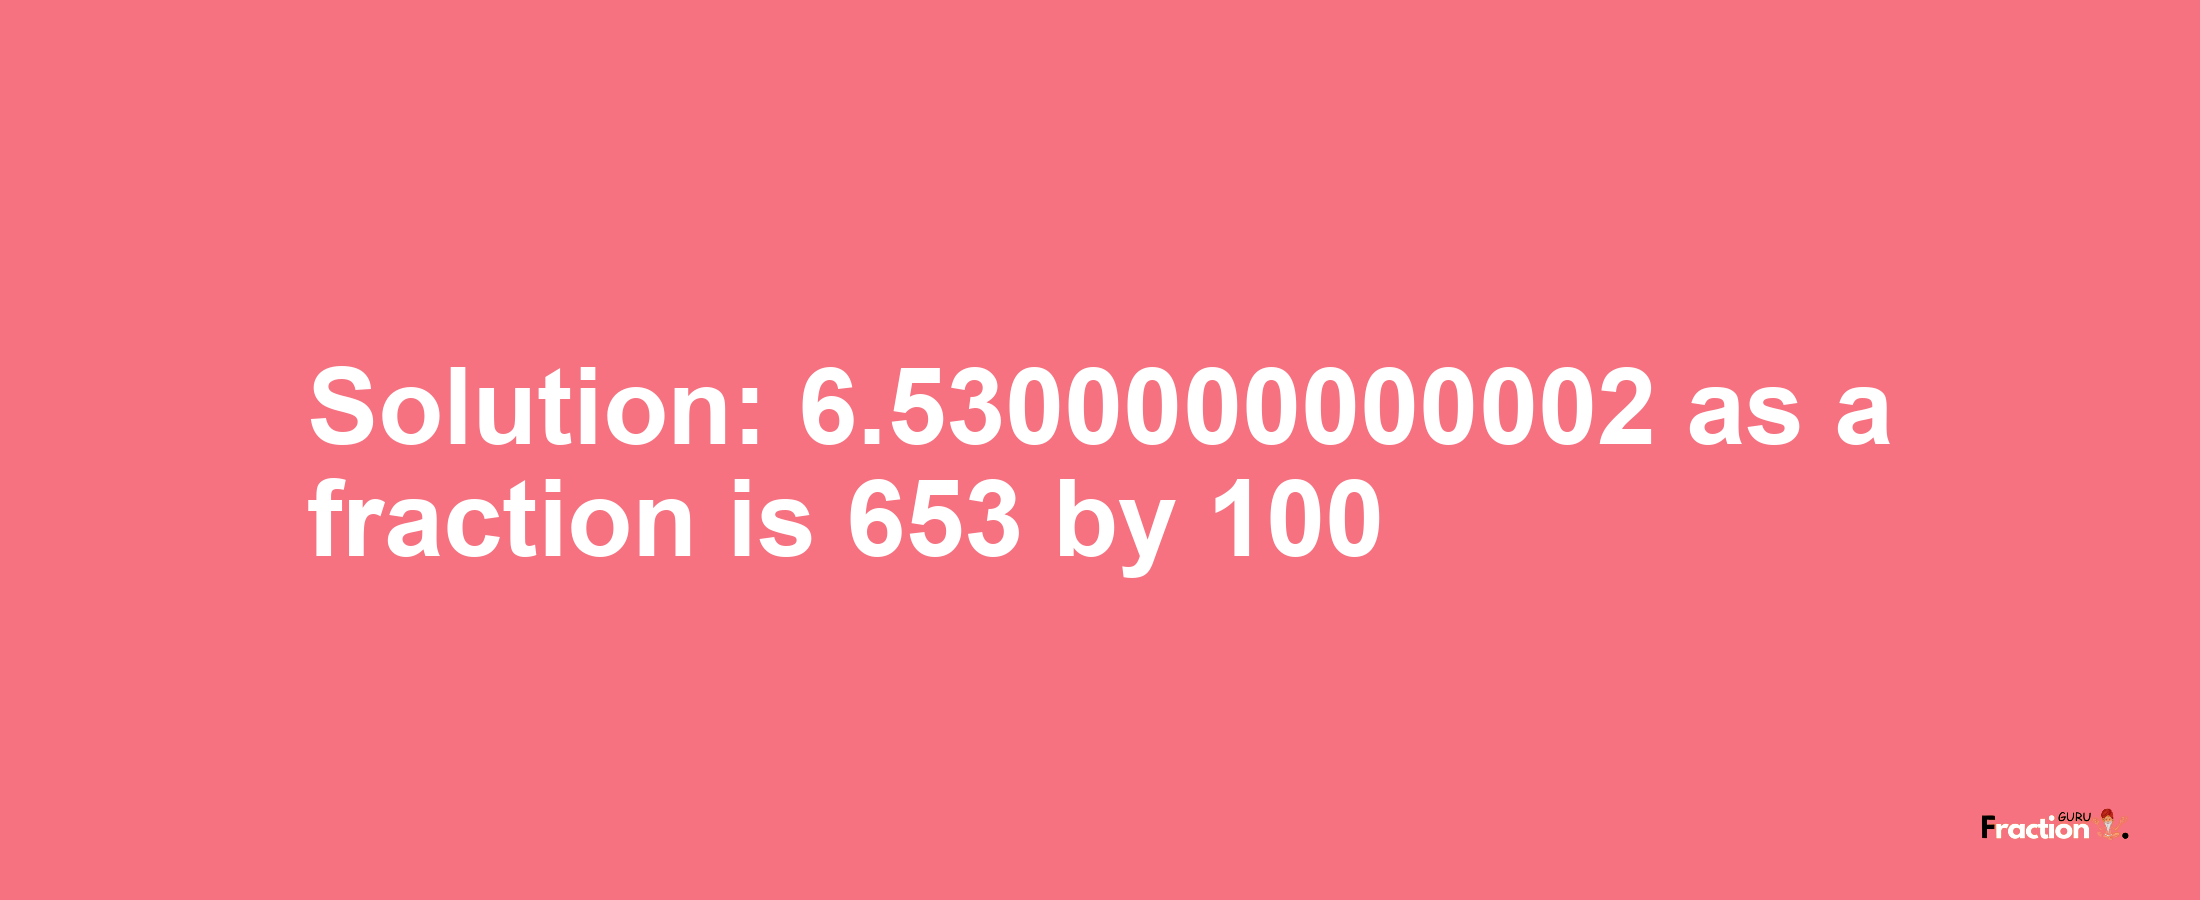 Solution:6.5300000000002 as a fraction is 653/100